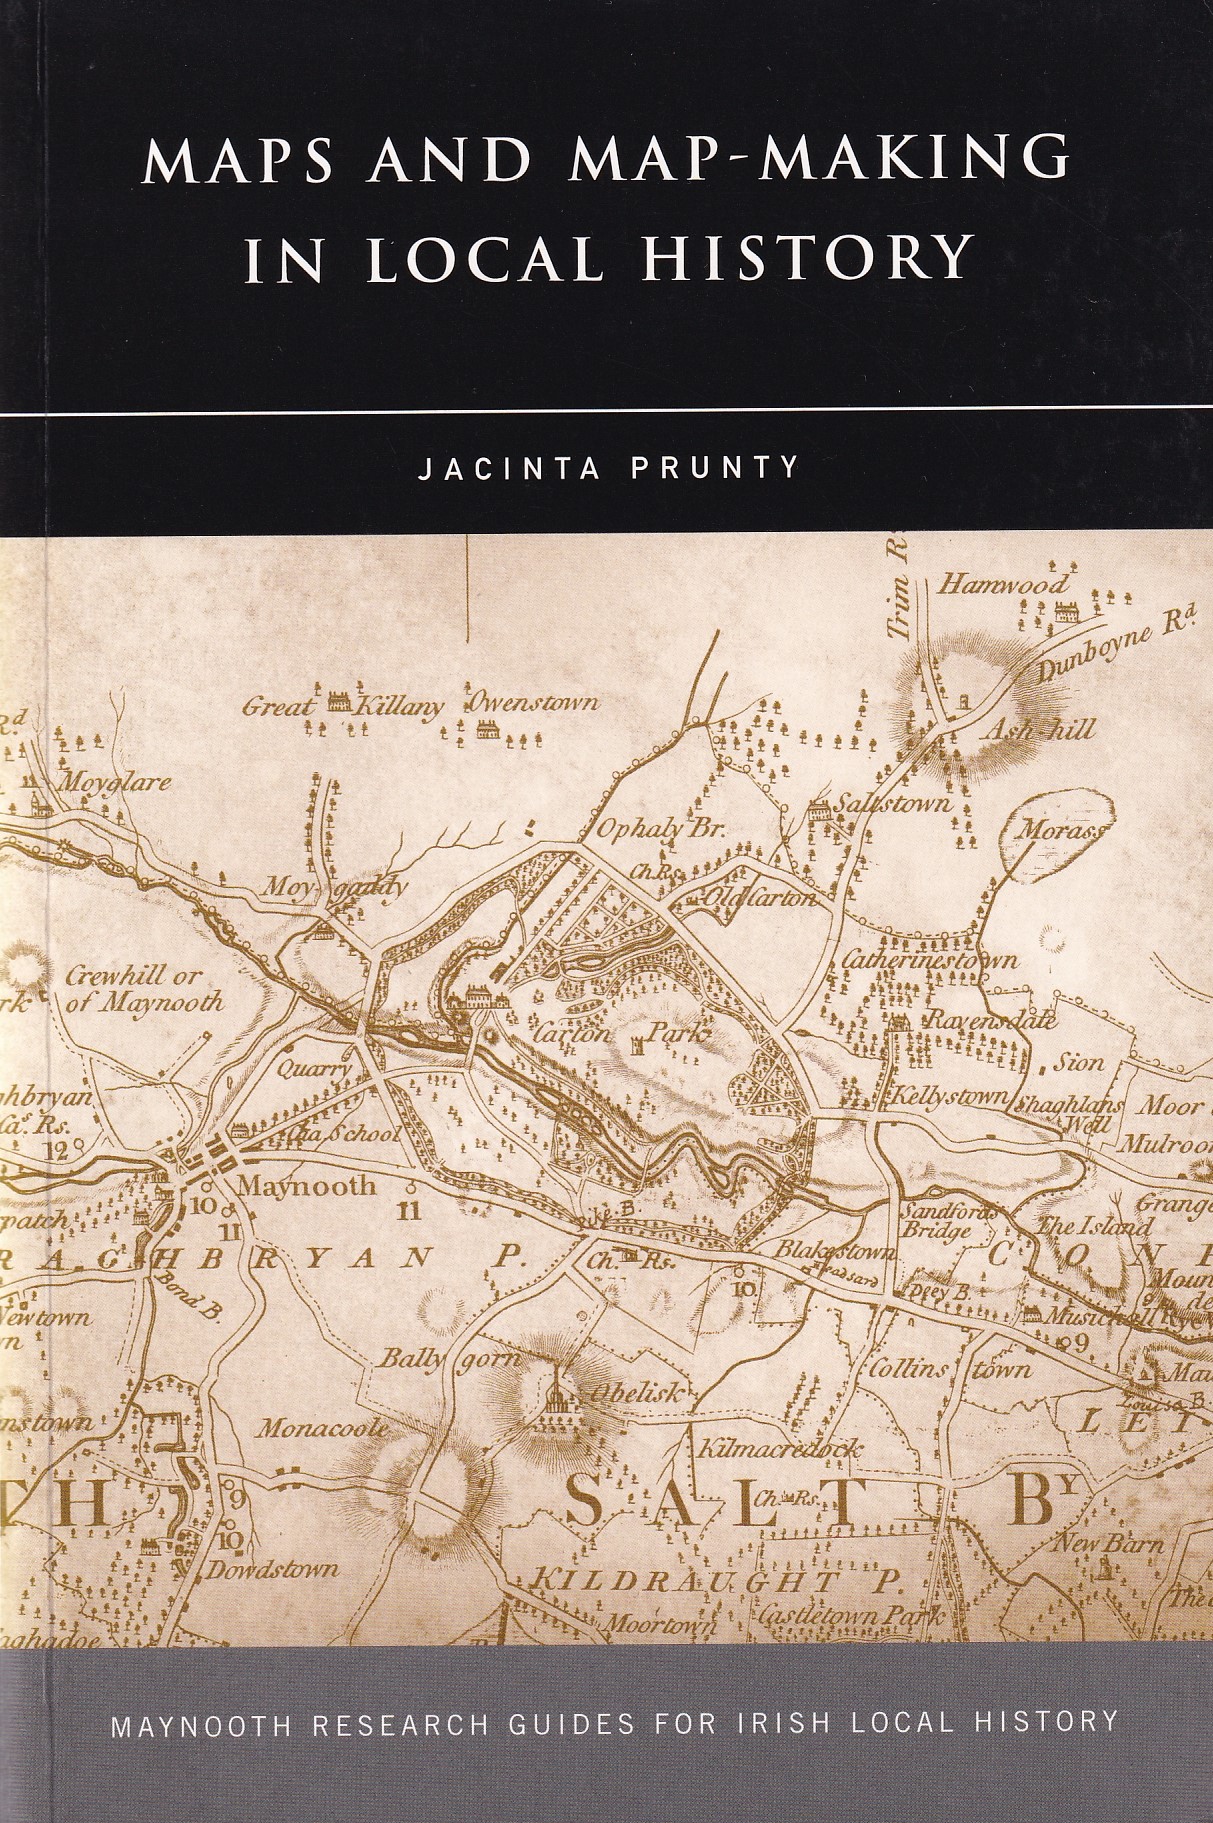 Maps and Map-Making in Local History | Jacinta Prunty | Charlie Byrne's